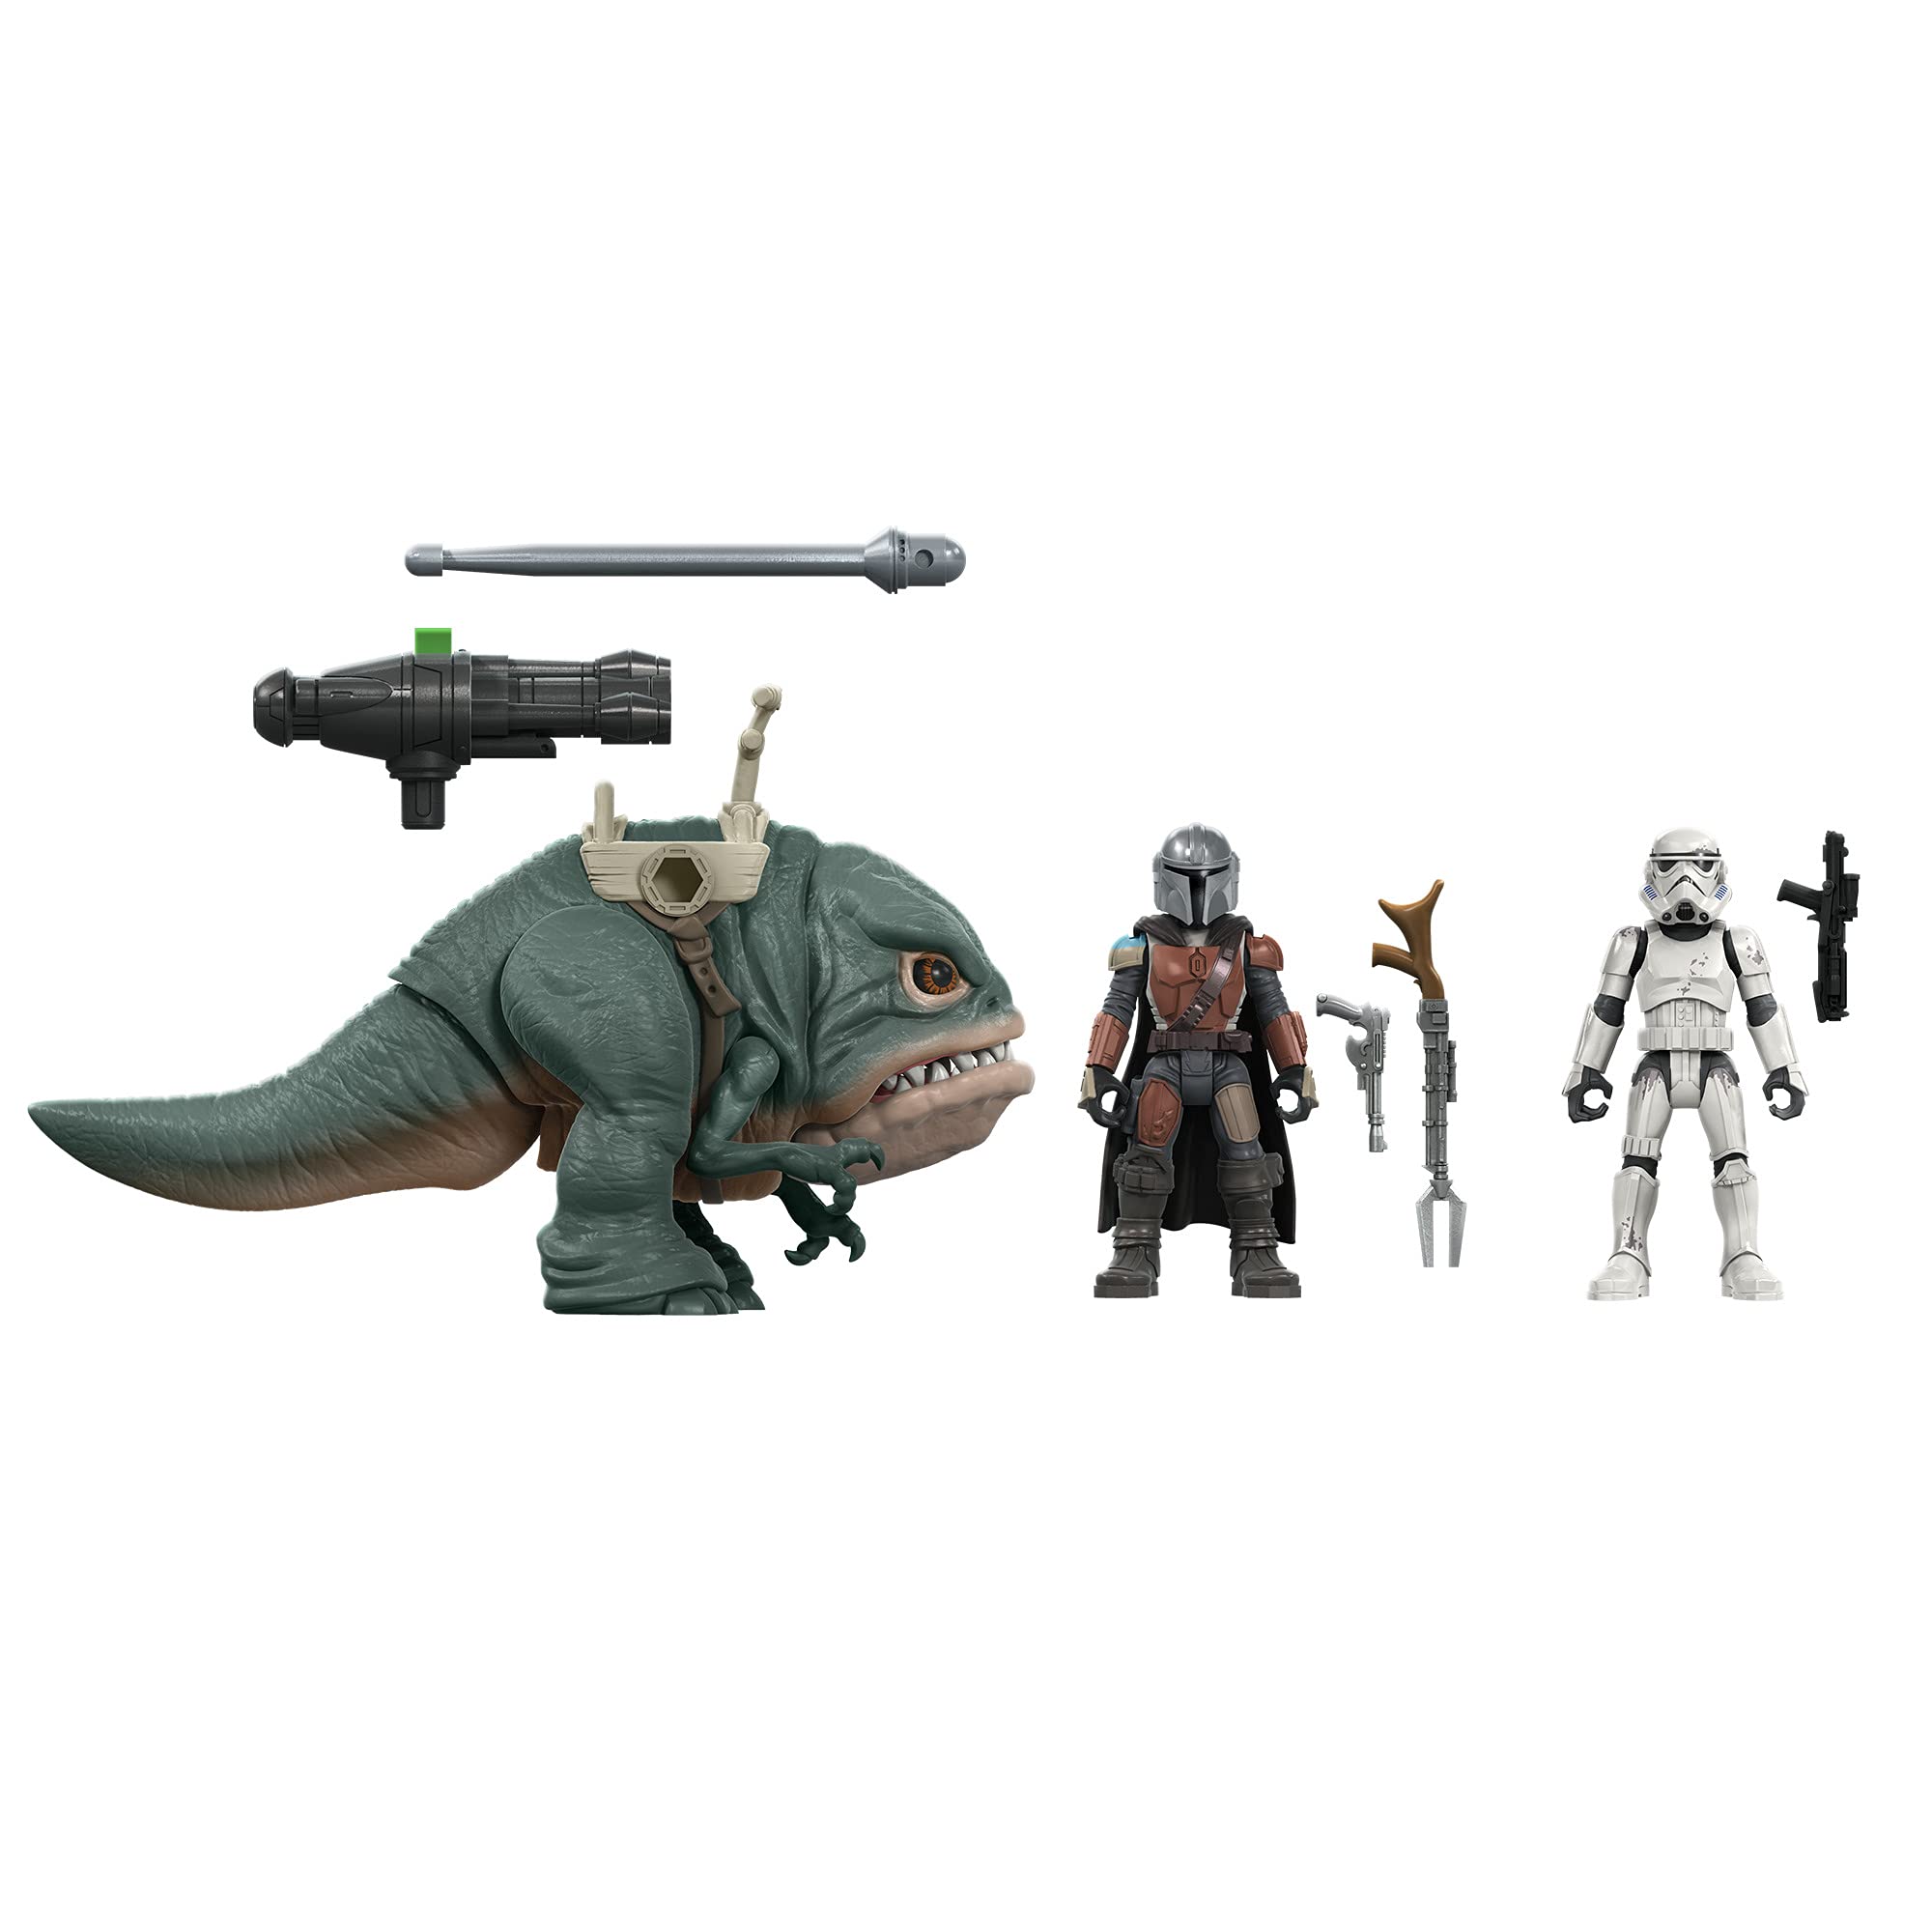 Star Wars Hasbro Mission Fleet Expedition Class The Mandalorian, Blurrg, Remnant Stormtrooper Toys, Battle in The Woodland